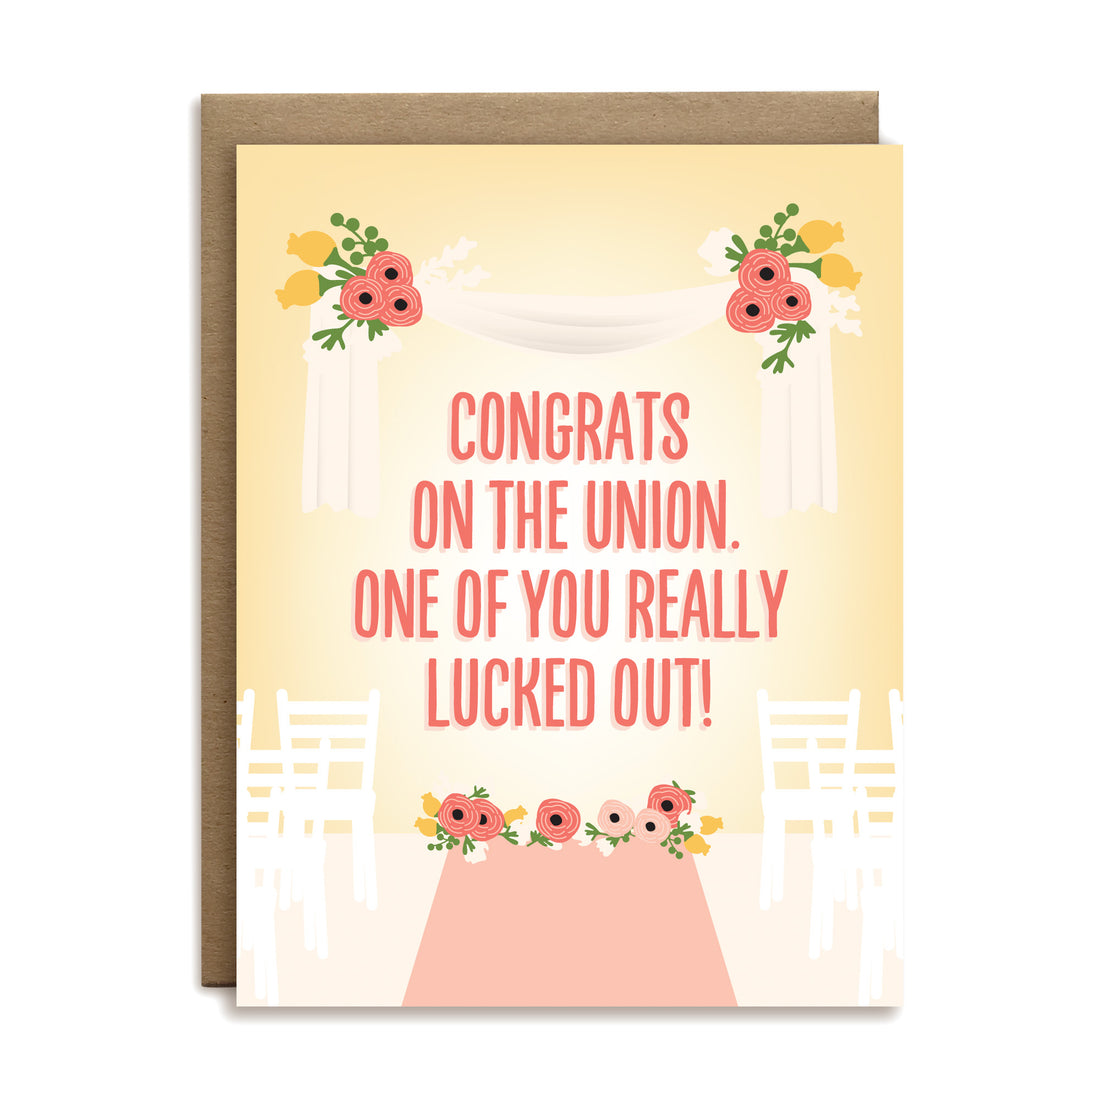 Congrats on the union. One of you really lucked out! wedding greeting card by I&